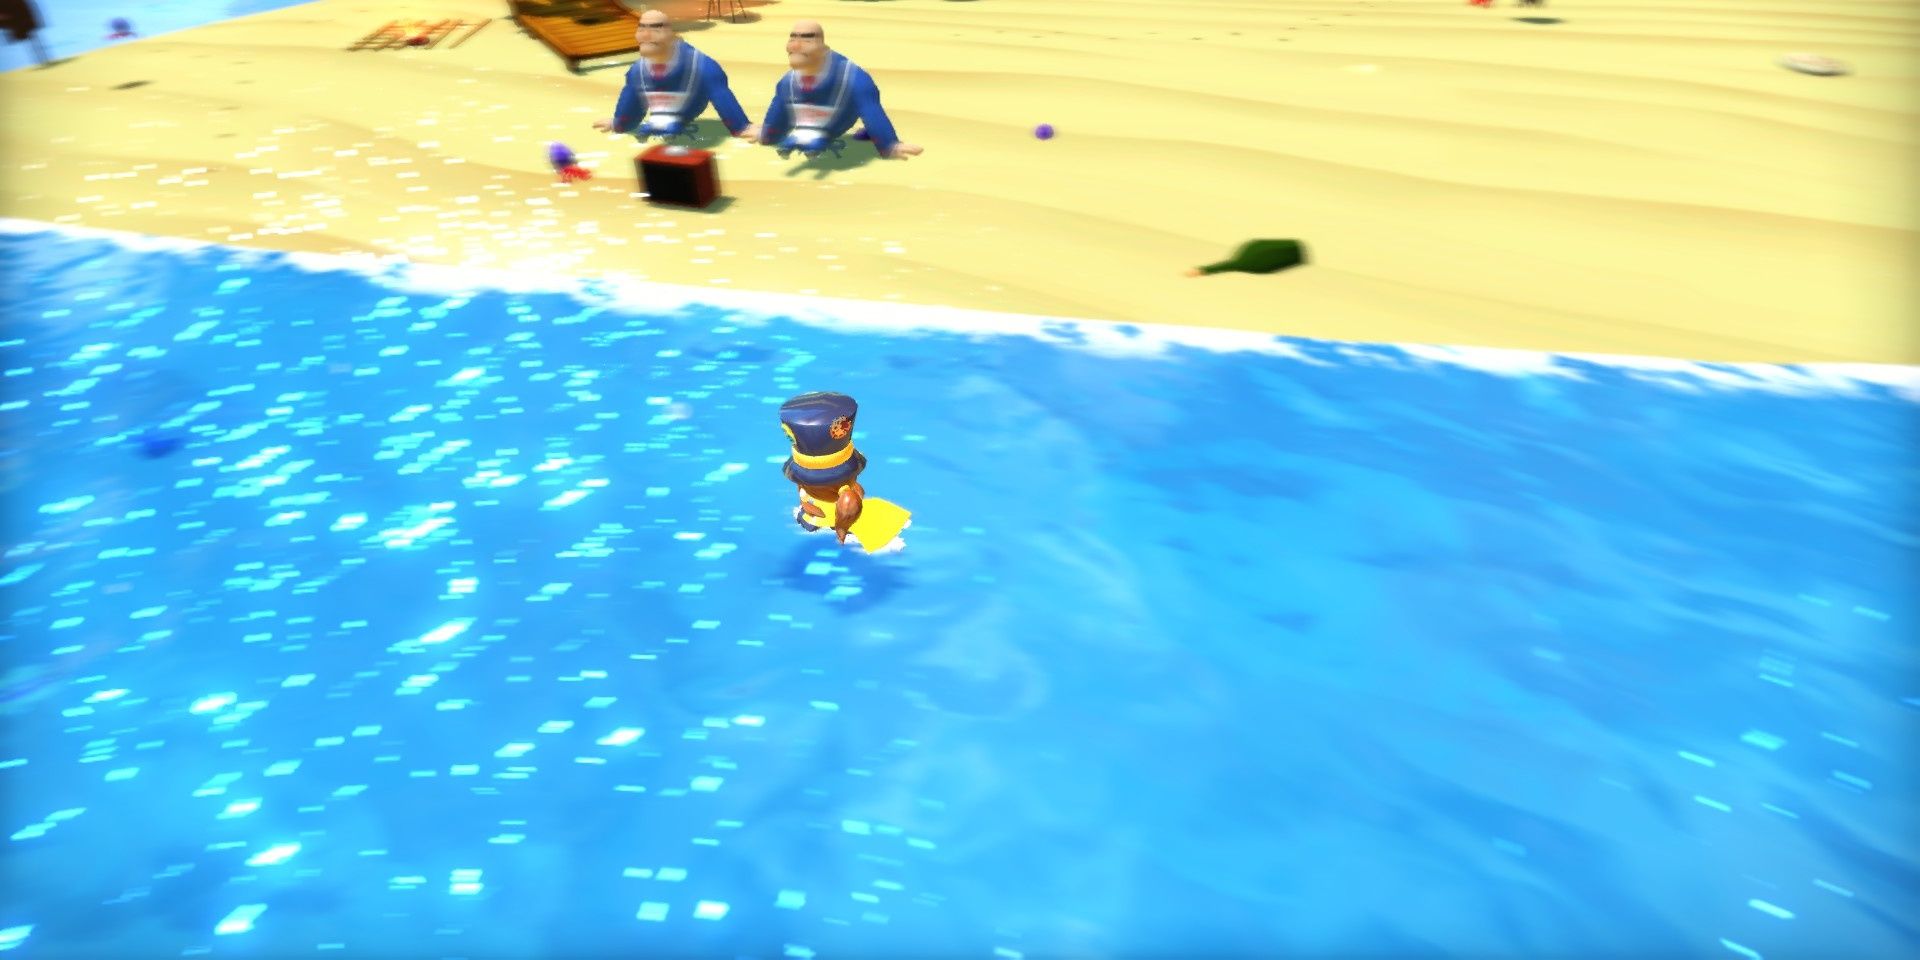 Hat Kid swimming really fast in A Hat In Time